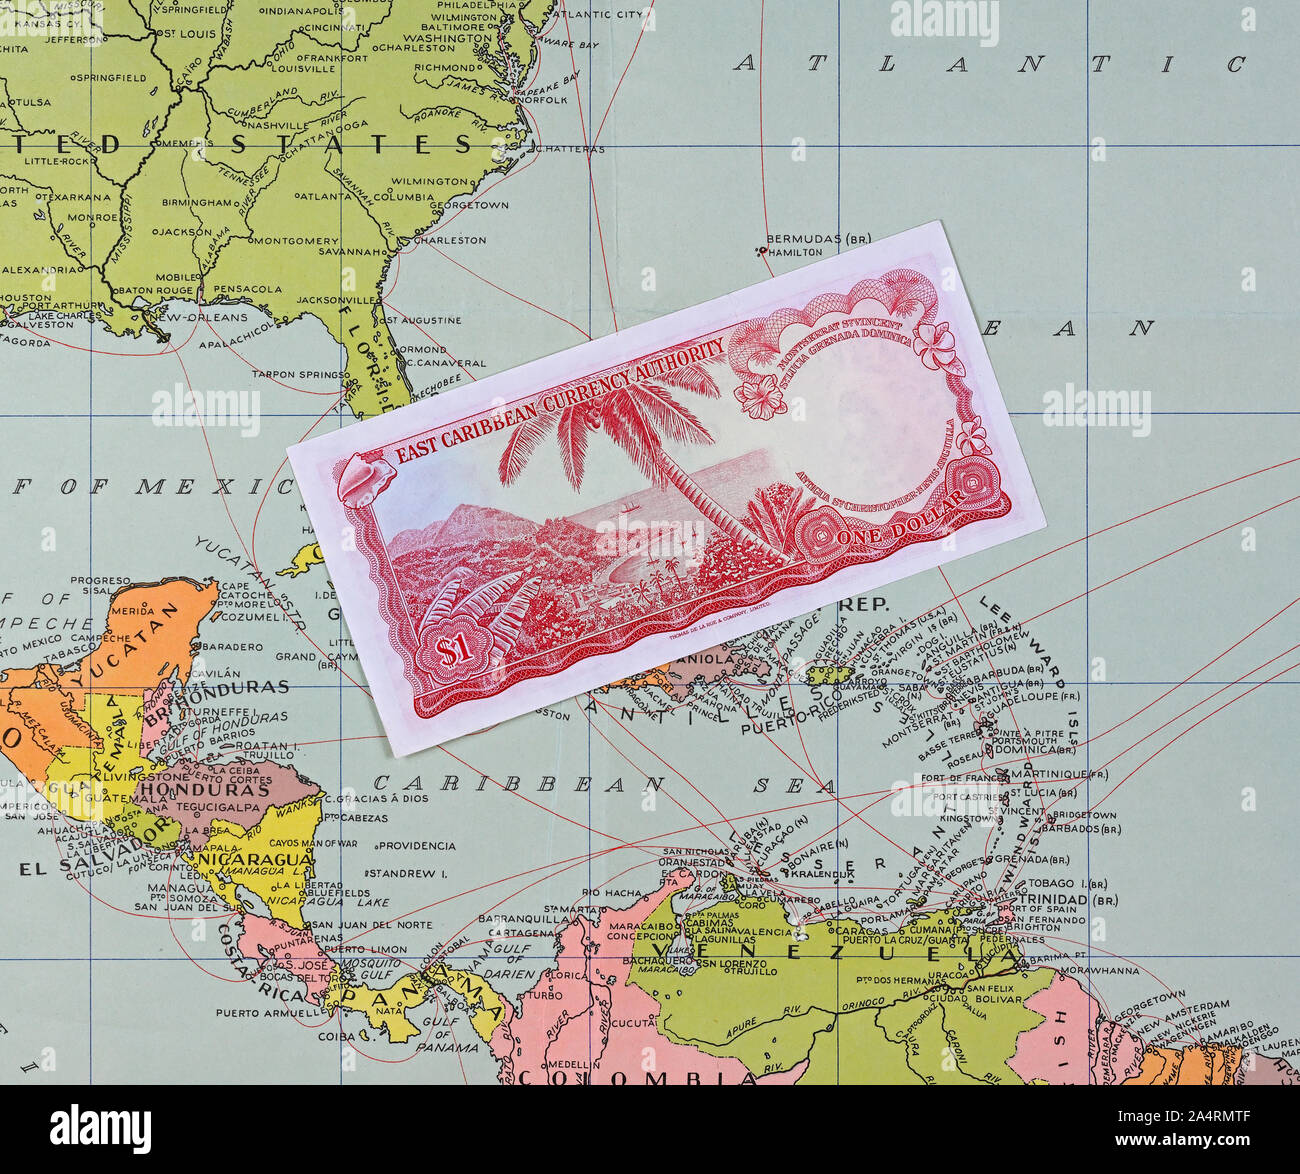 papenburg, germany - 2019.10.14: one dollar banknote of the east caribbean currency authority on a historic map of dutch knsm shipping company Stock Photo